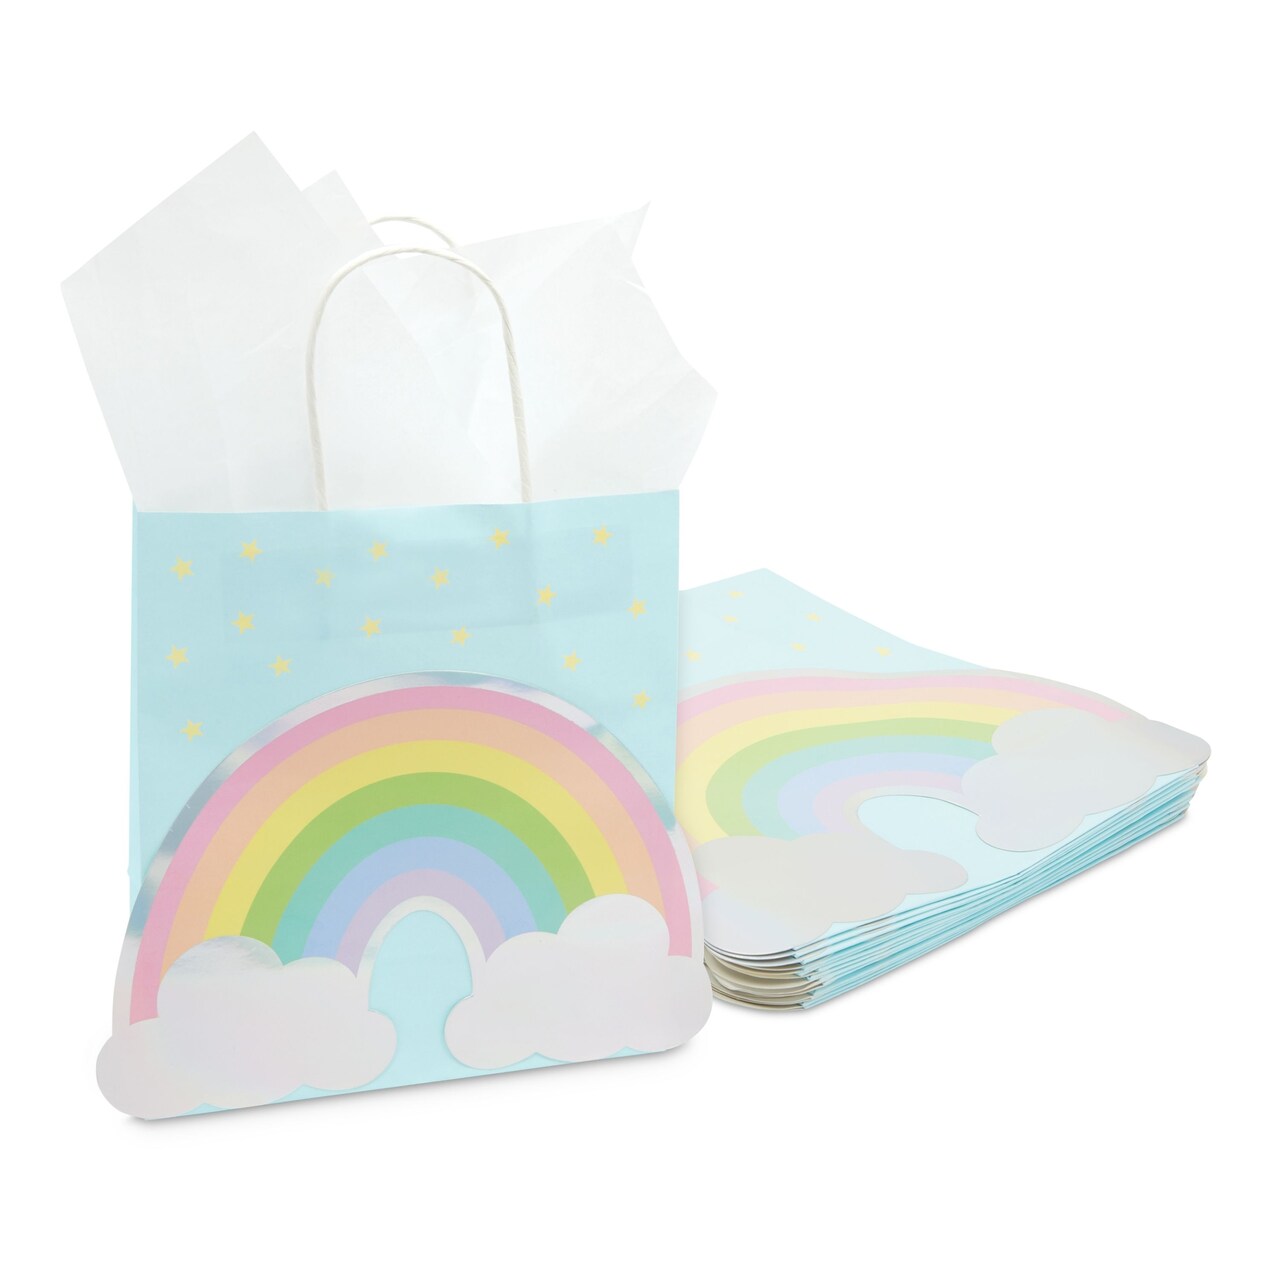 Rainbow Gift Bags with Handles and White Tissue Paper (15 Pack